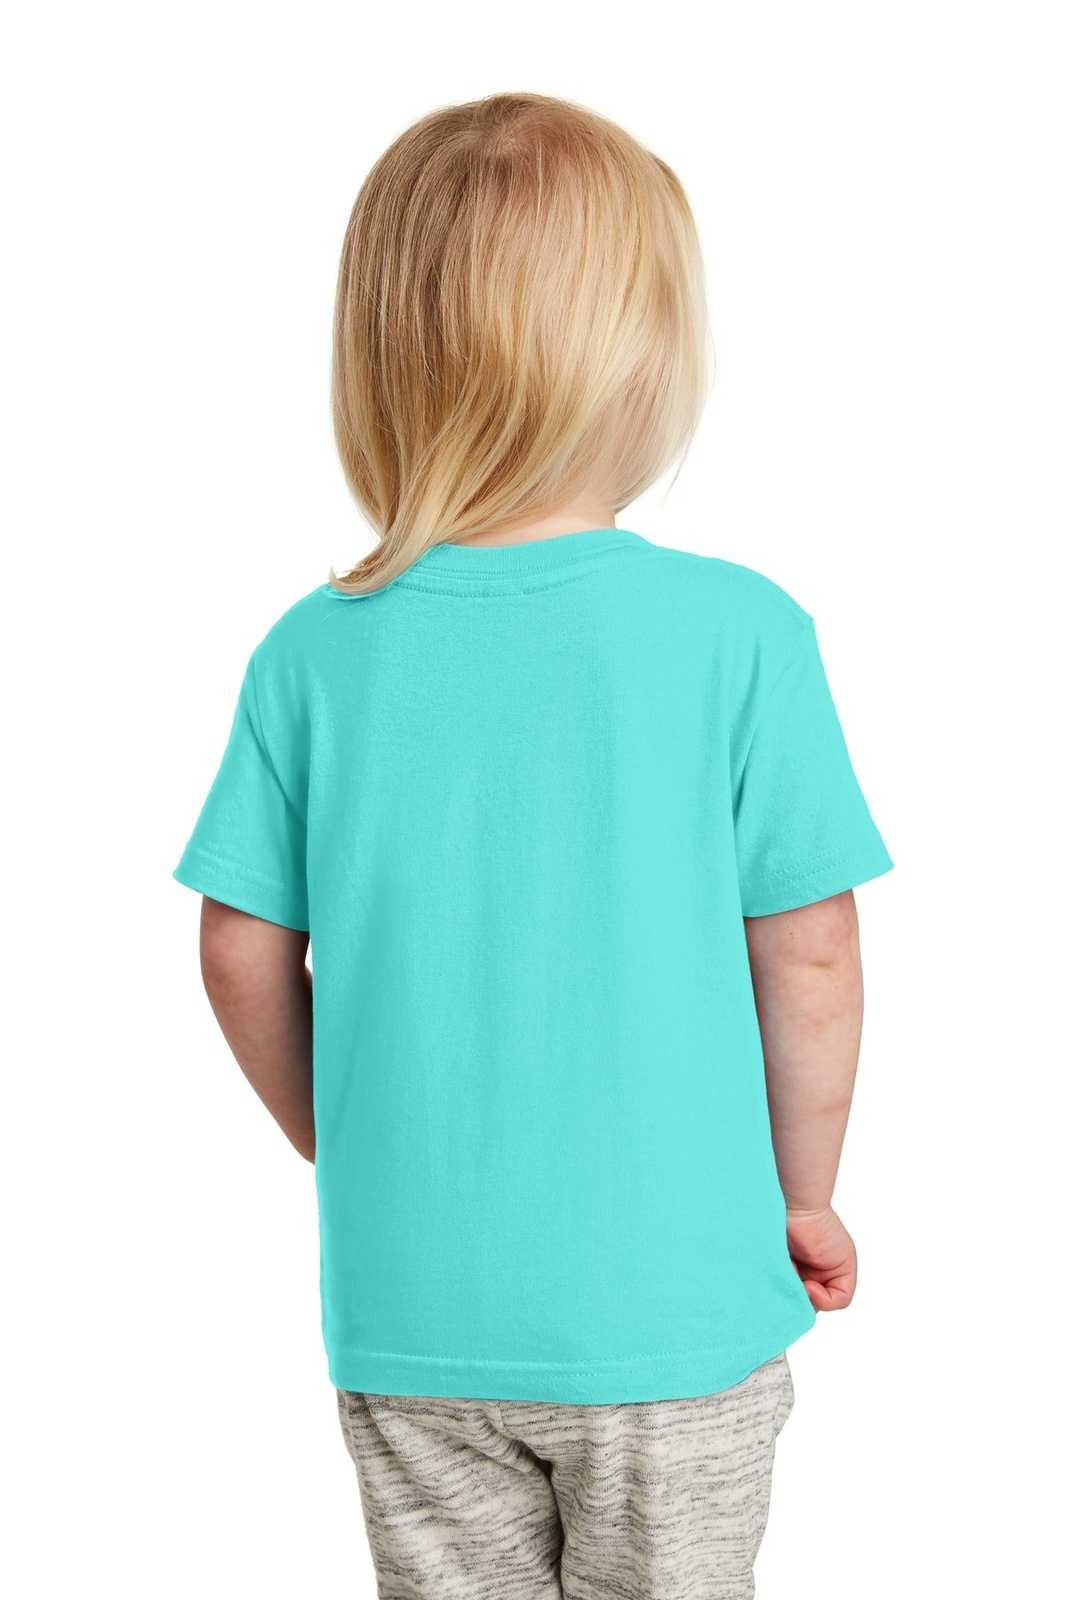 Rabbit Skins 3321 Toddler Fine Jersey Tee - Caribbean - HIT a Double